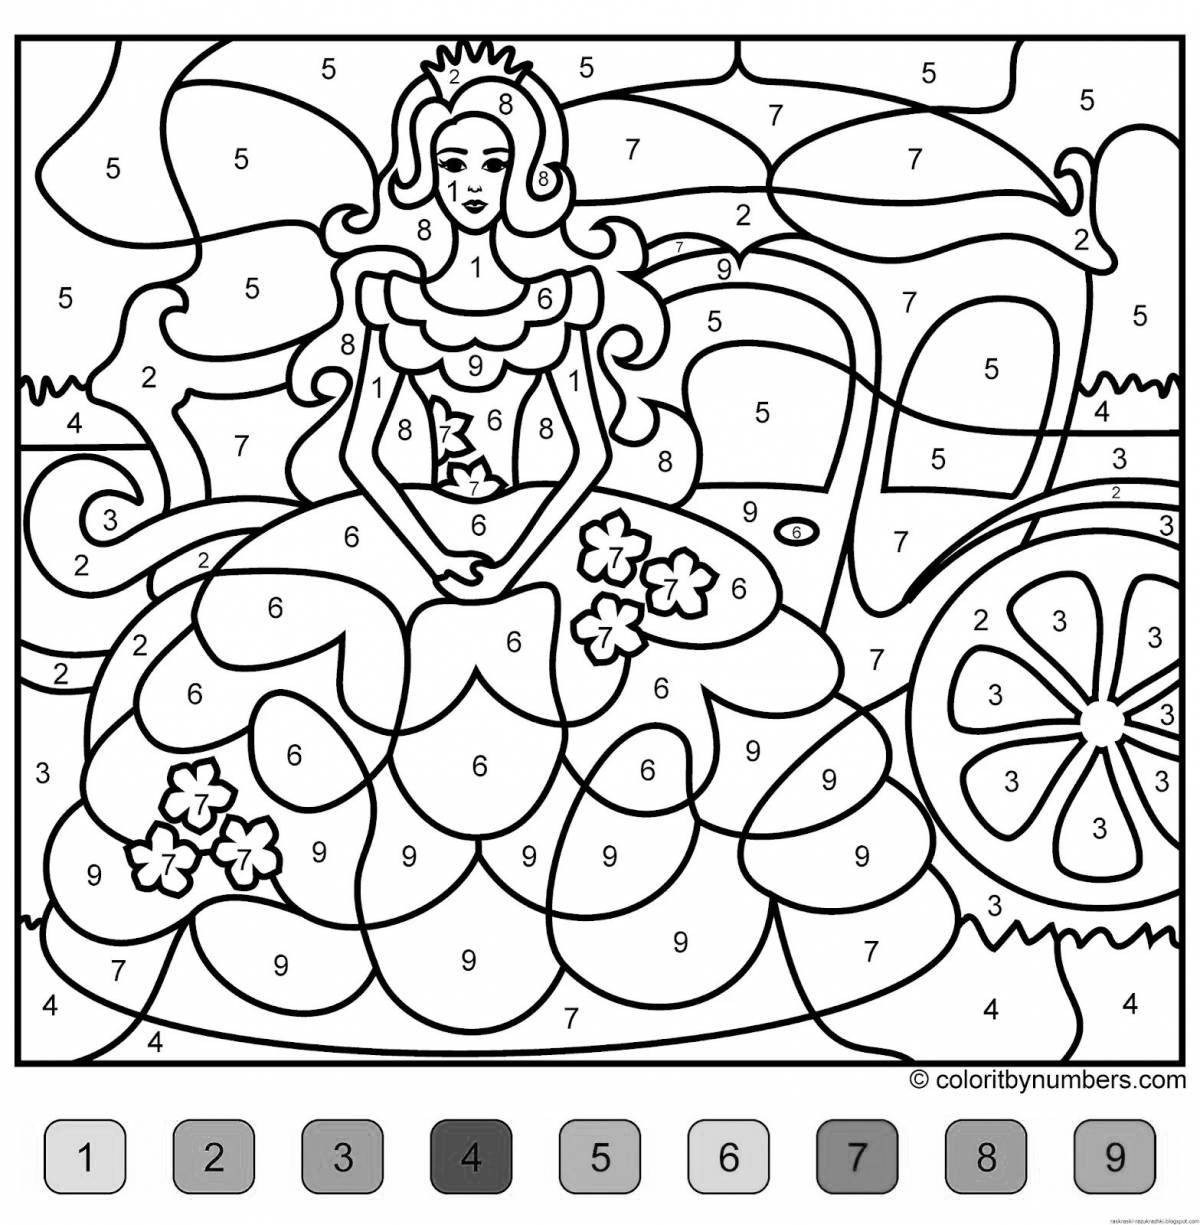 Fun coloring for girls 6-7 years old